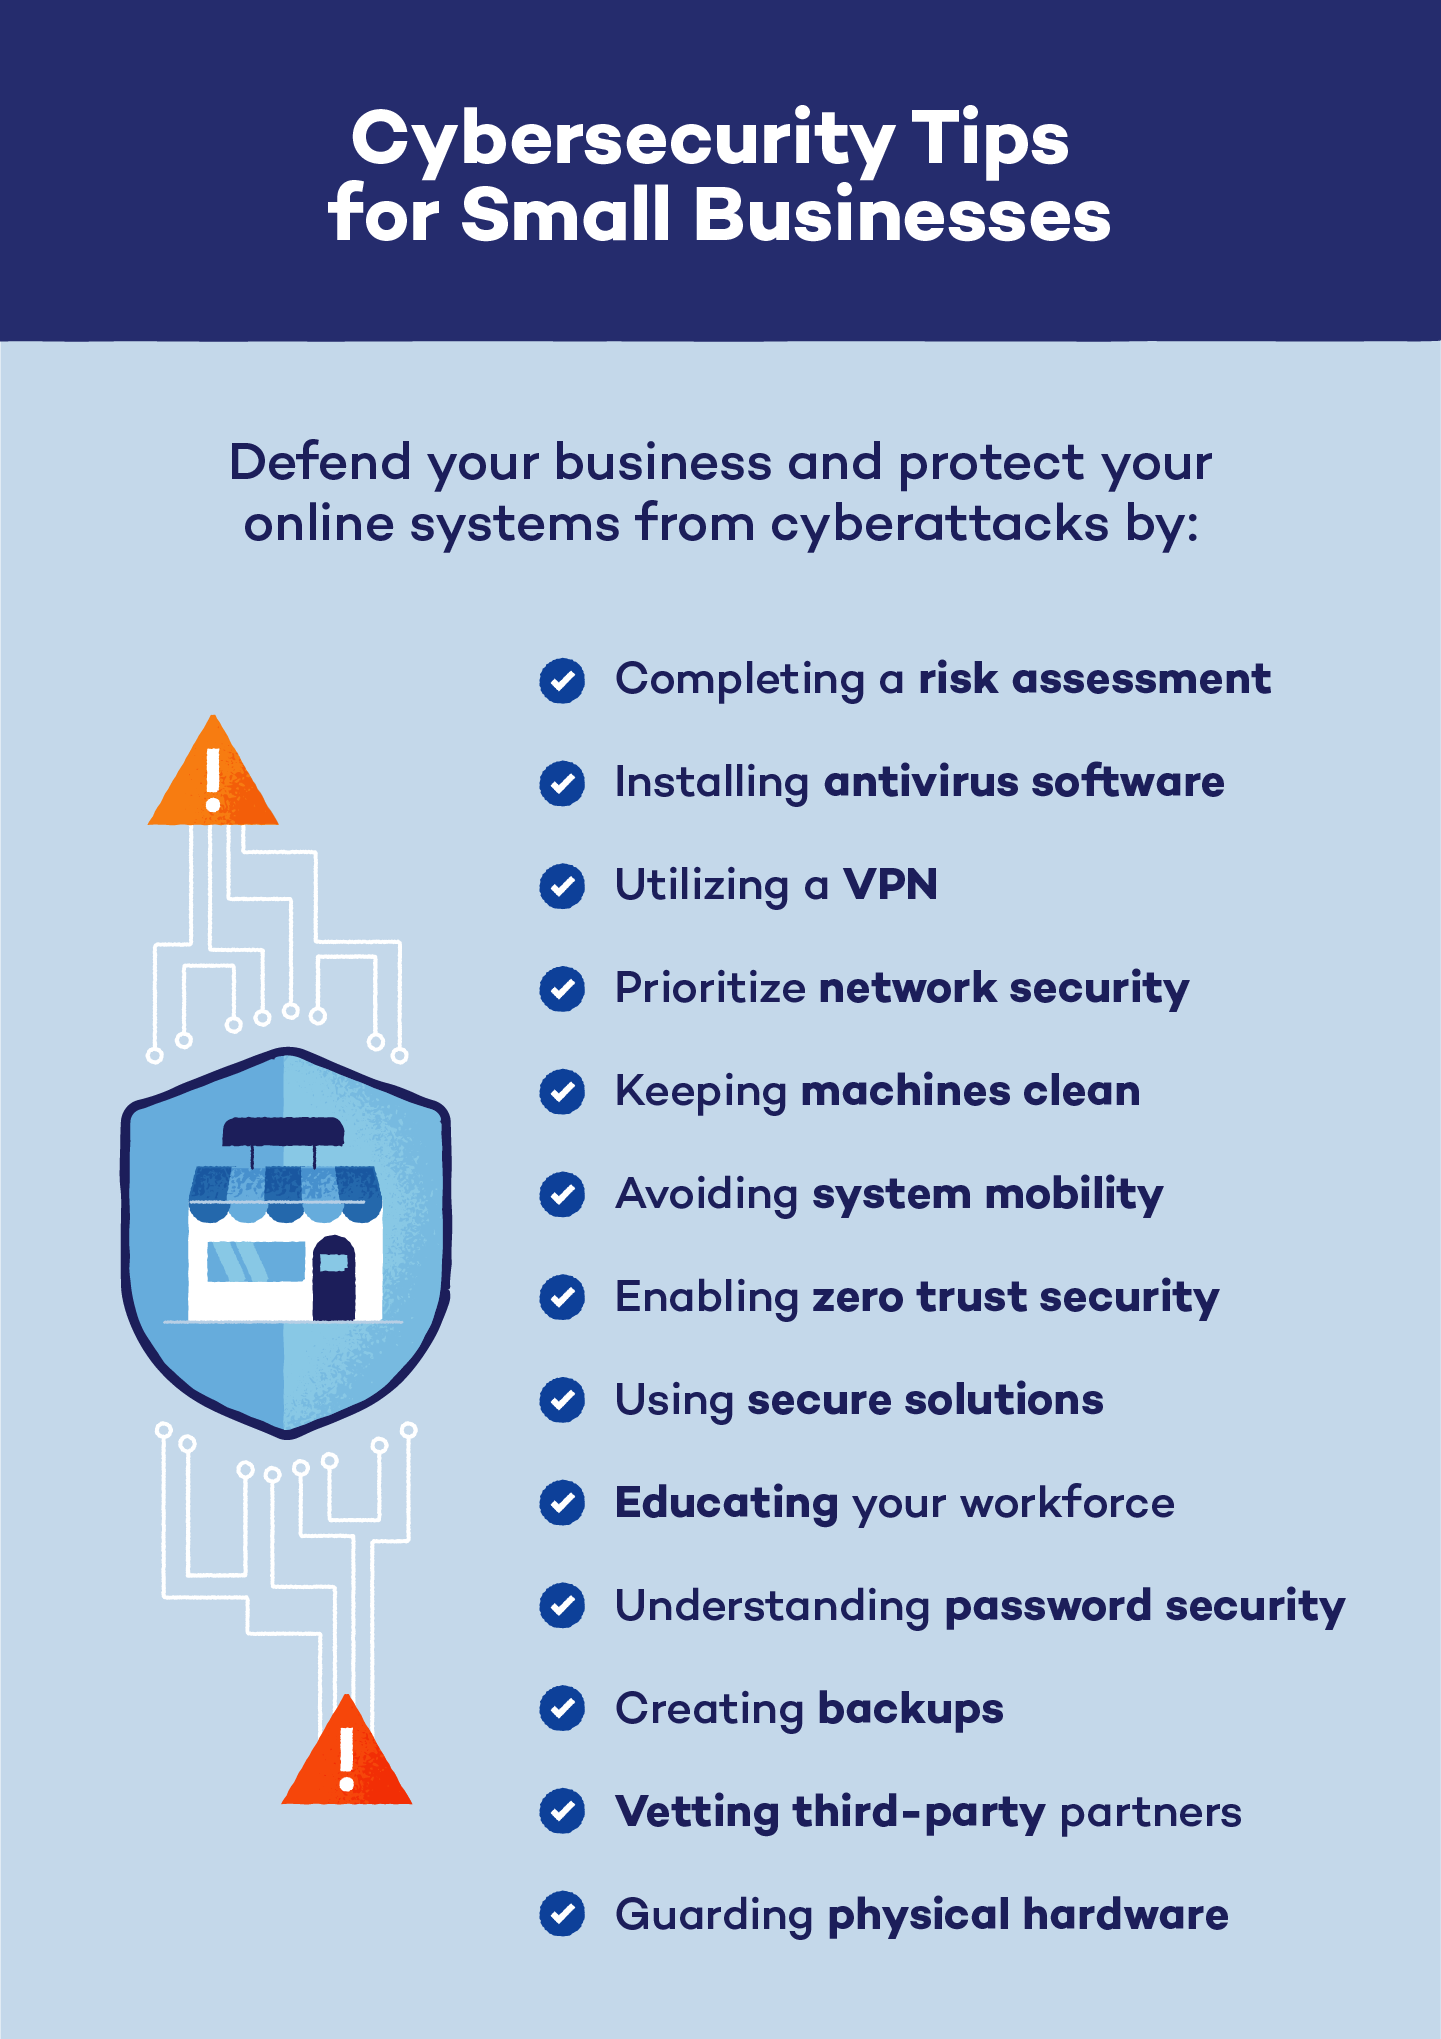 13 cybersecurity tips for small businesses.